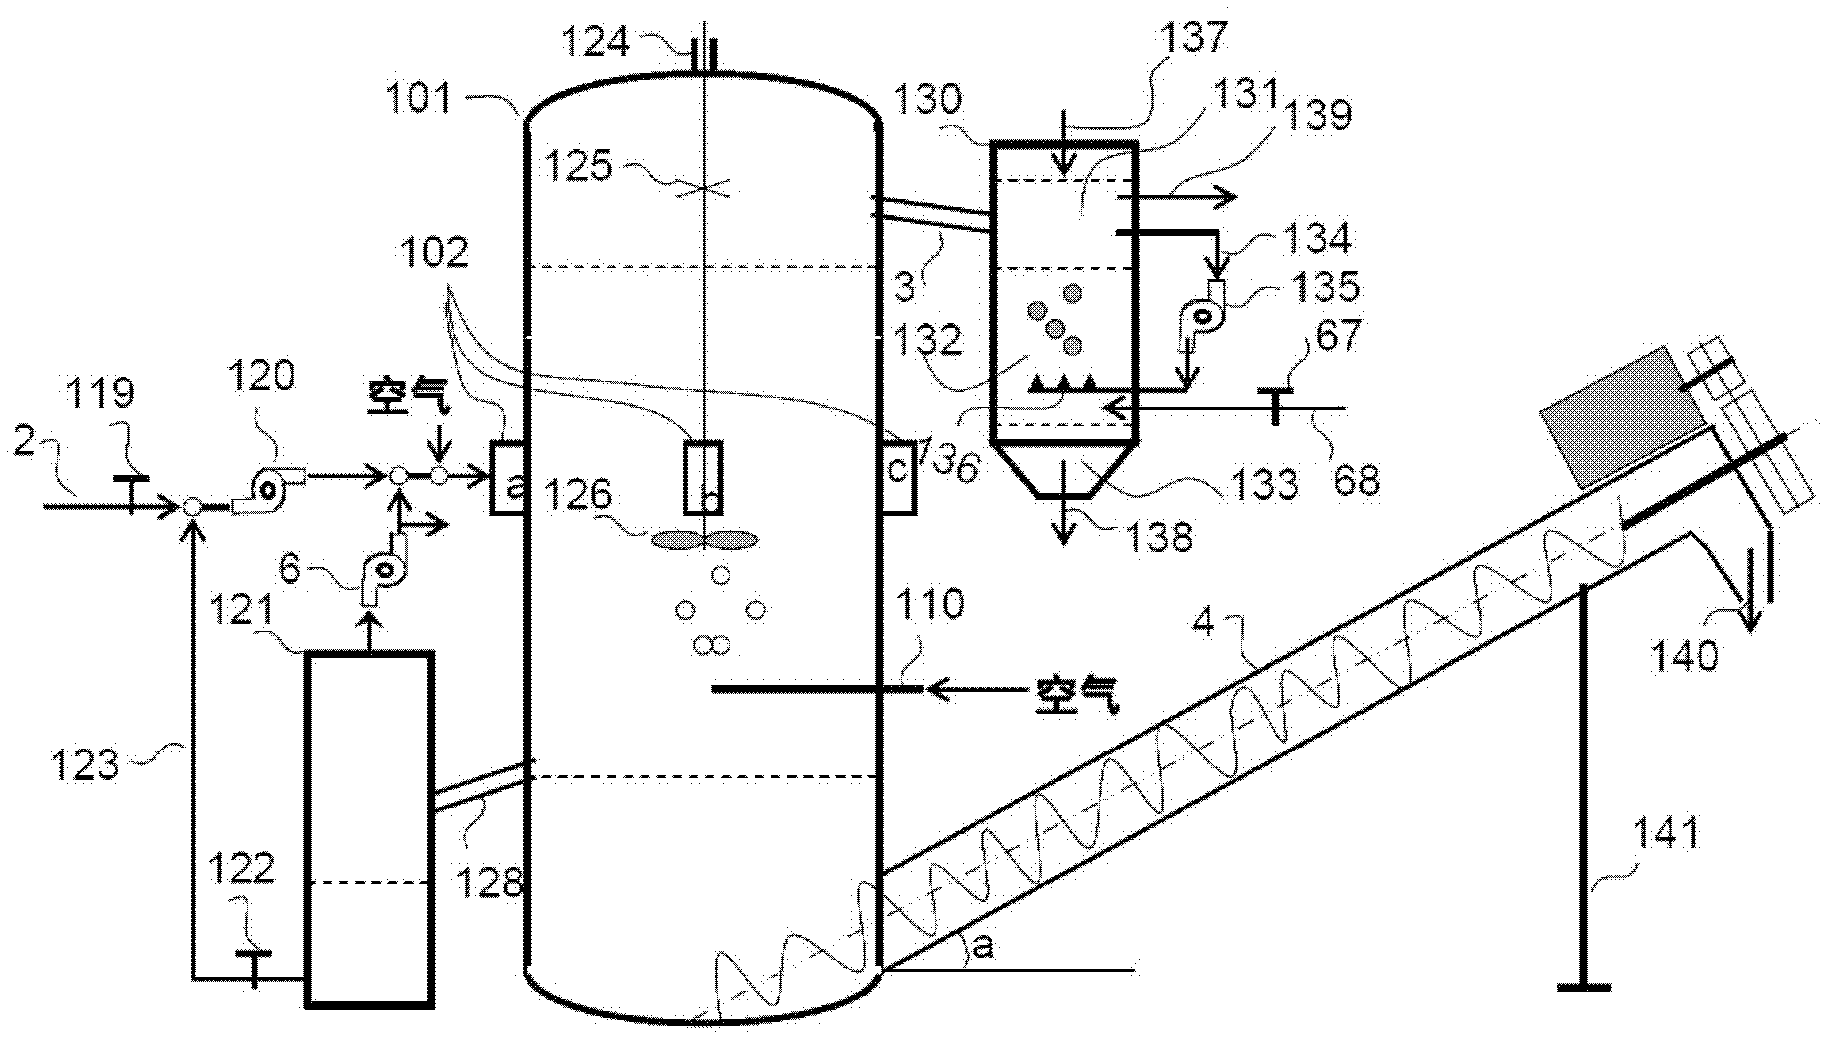 A system and method for treatment of oil sand tailings or oil sand ore pulp